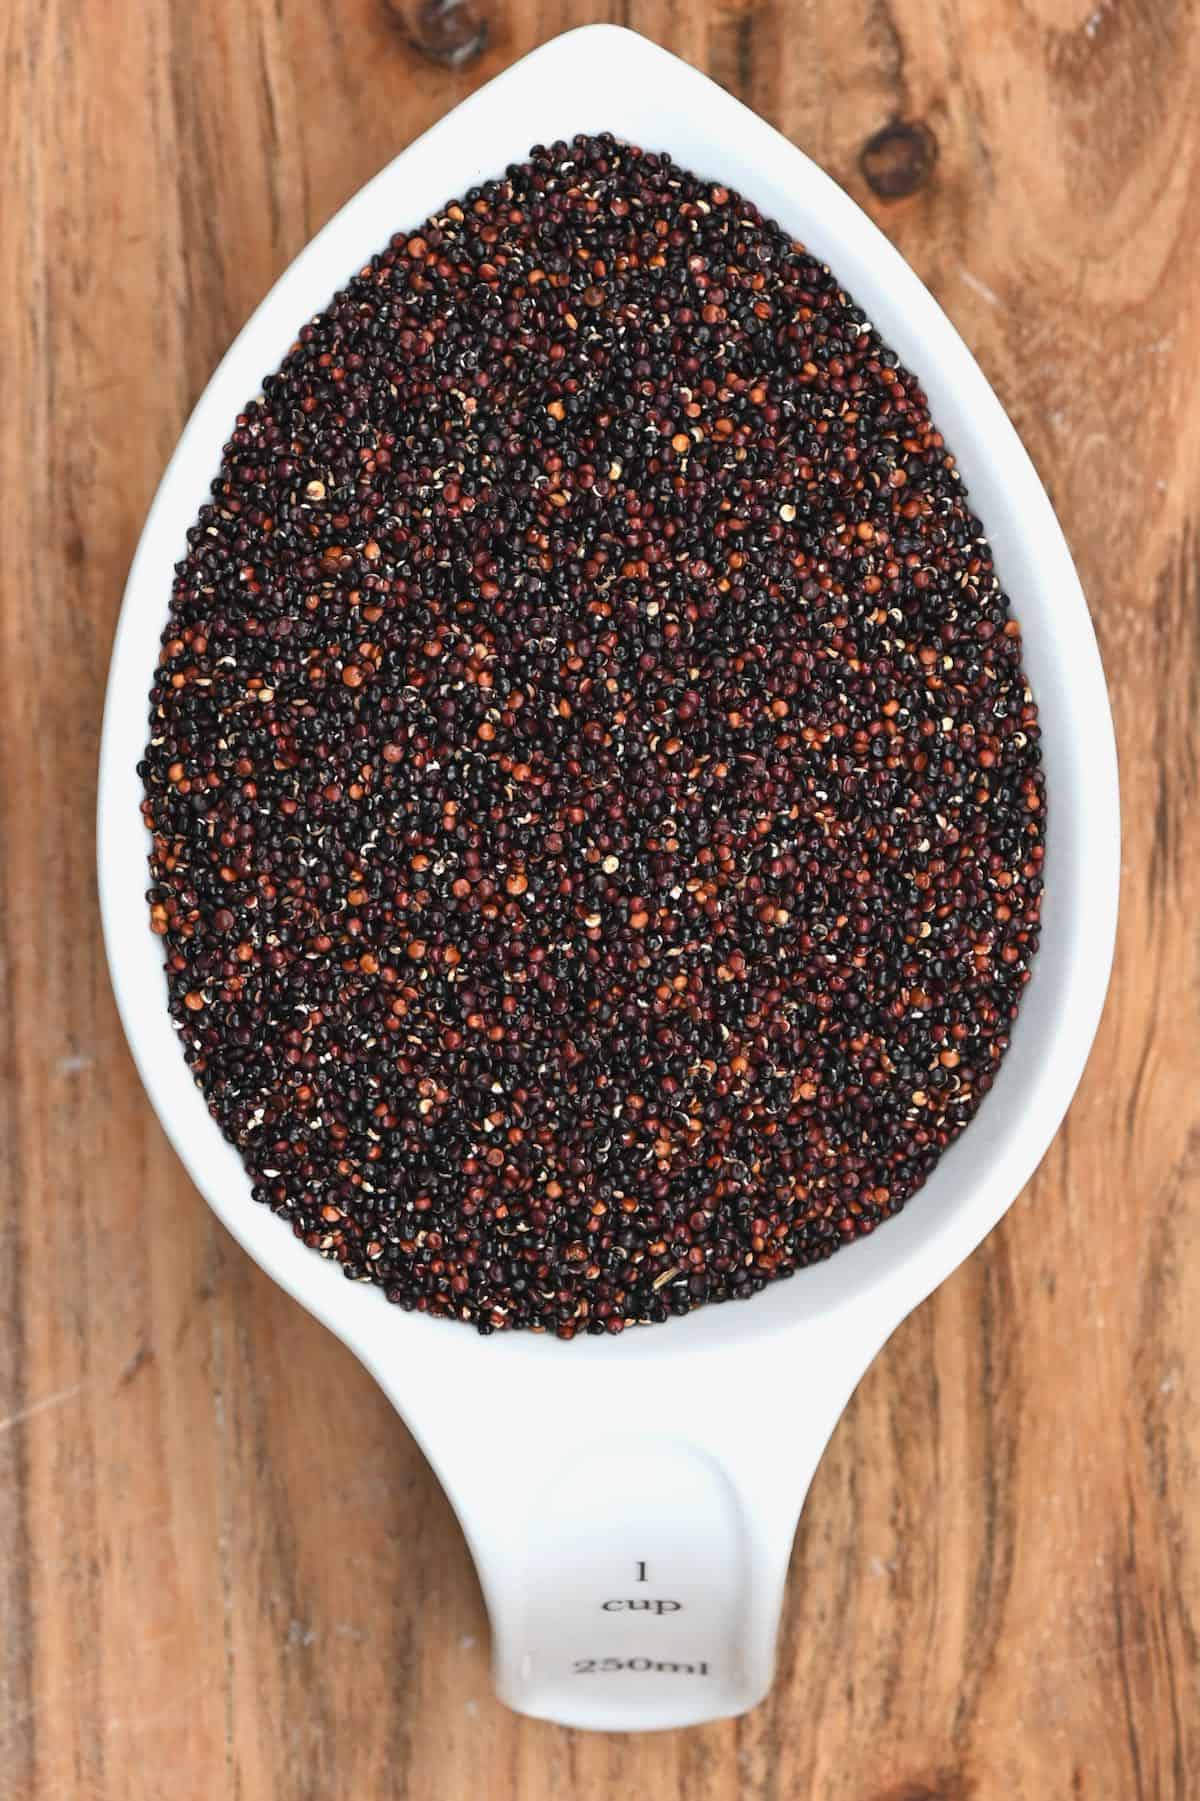 A cup filled with quinoa